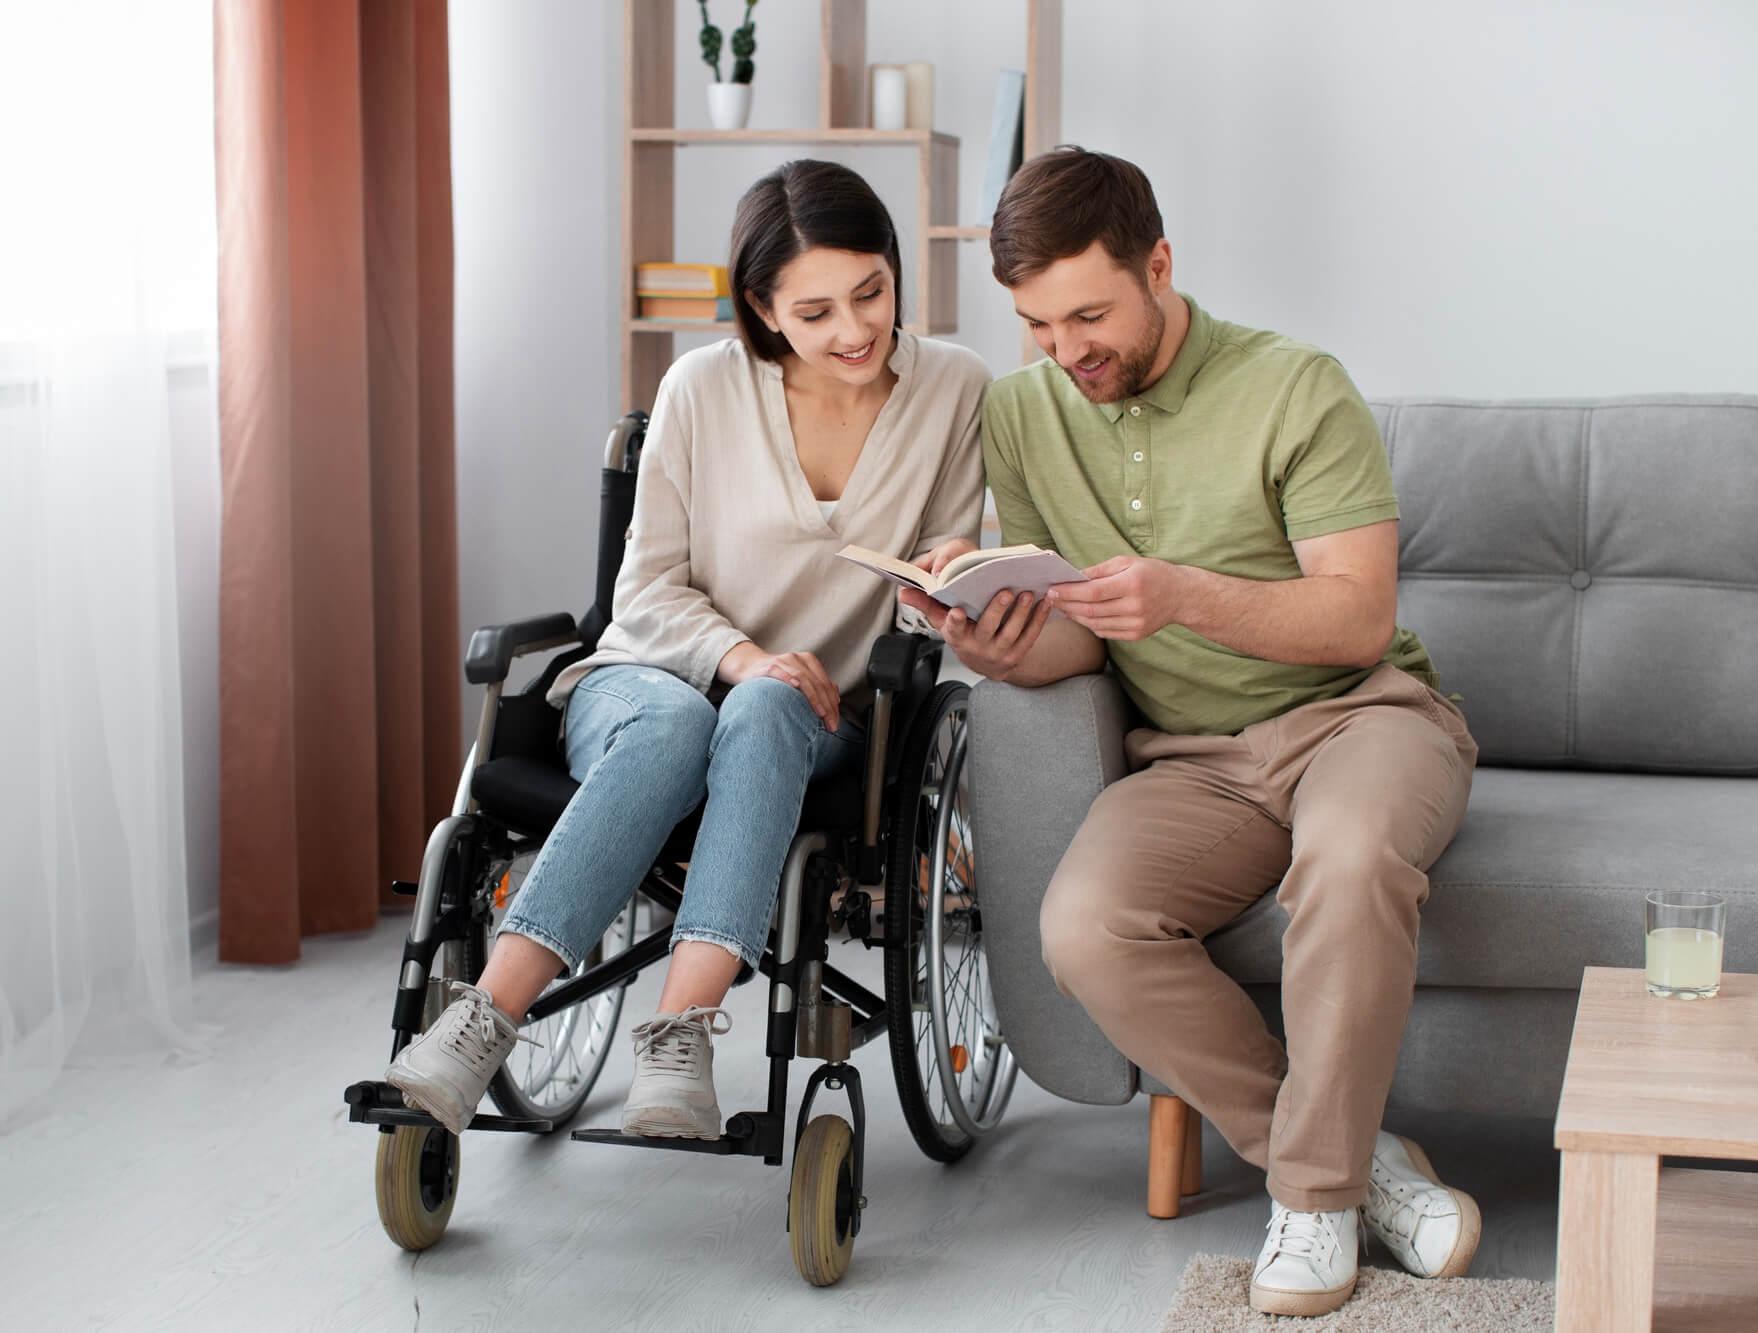 Female wheelchair user in home with man